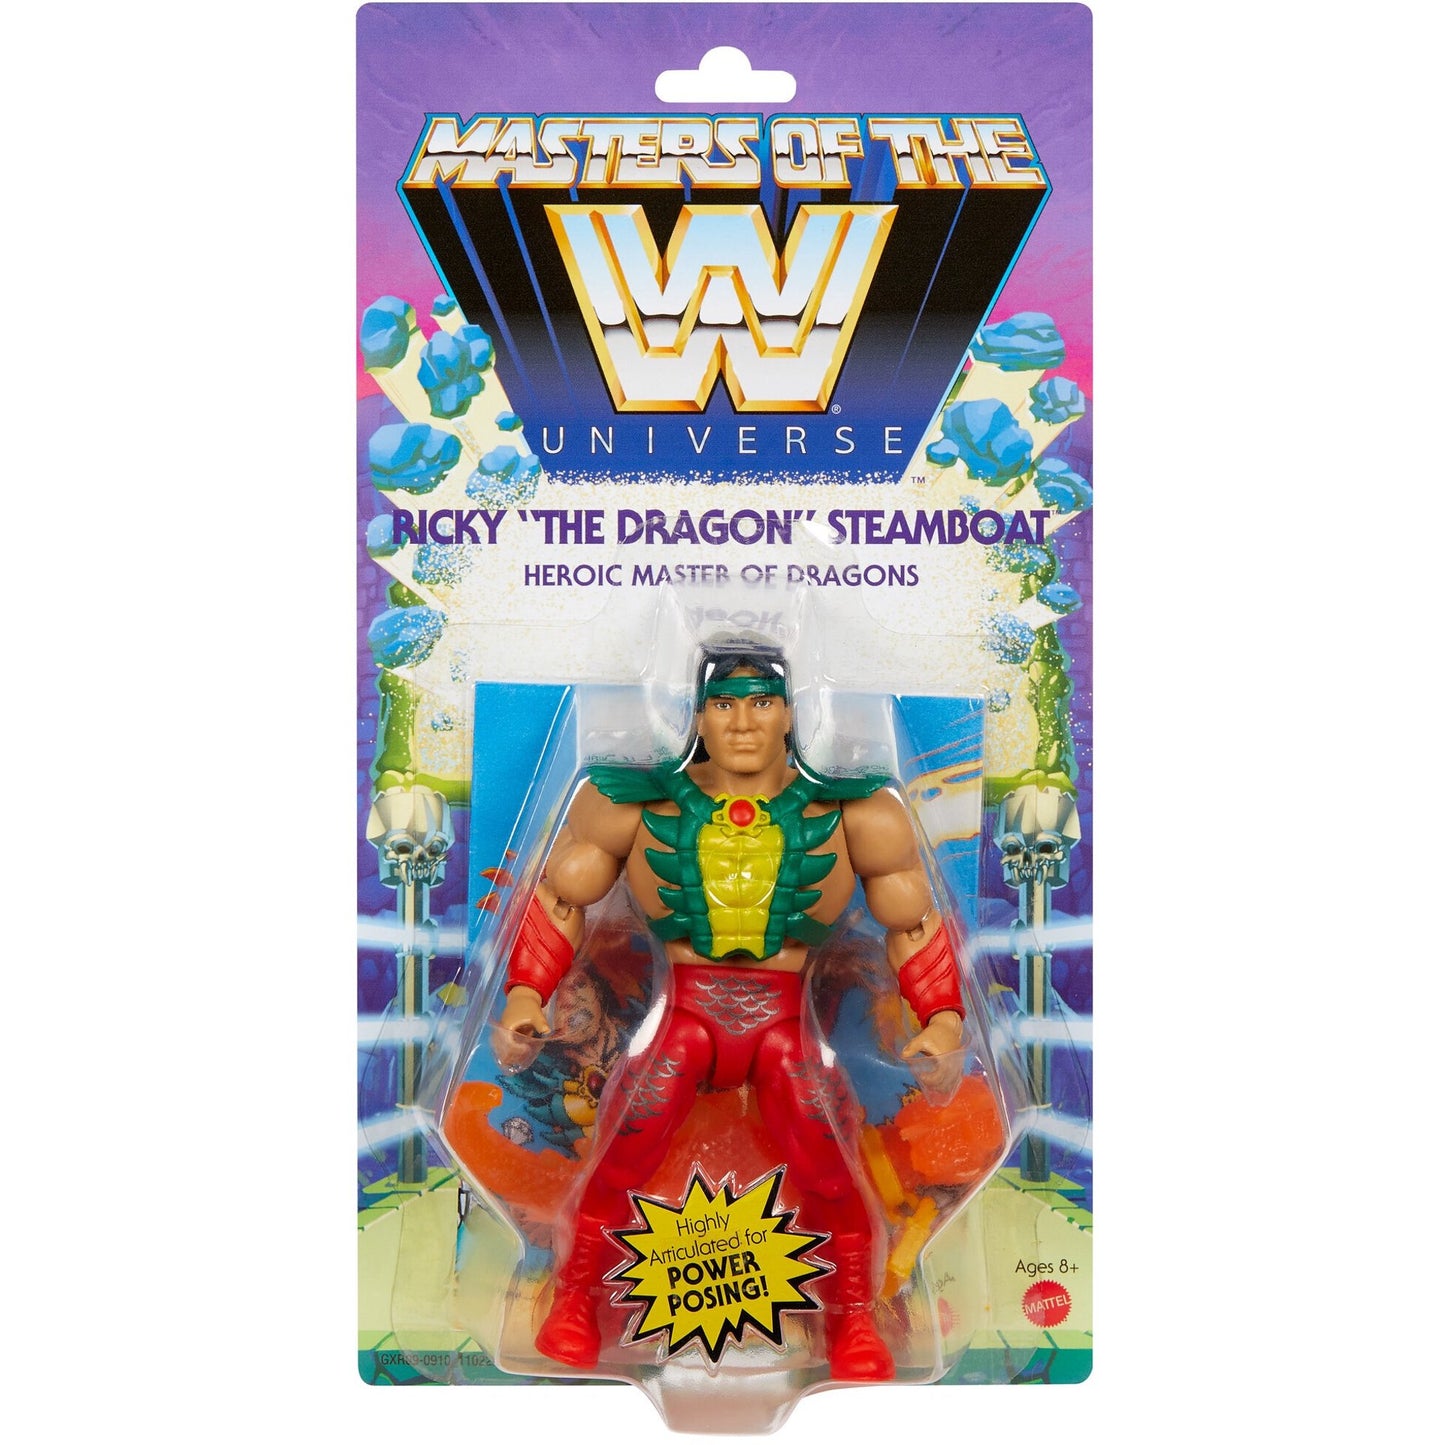 WWE Mattel Masters of the WWE Universe 5 Ricky "The Dragon" Steamboat [Exclusive]